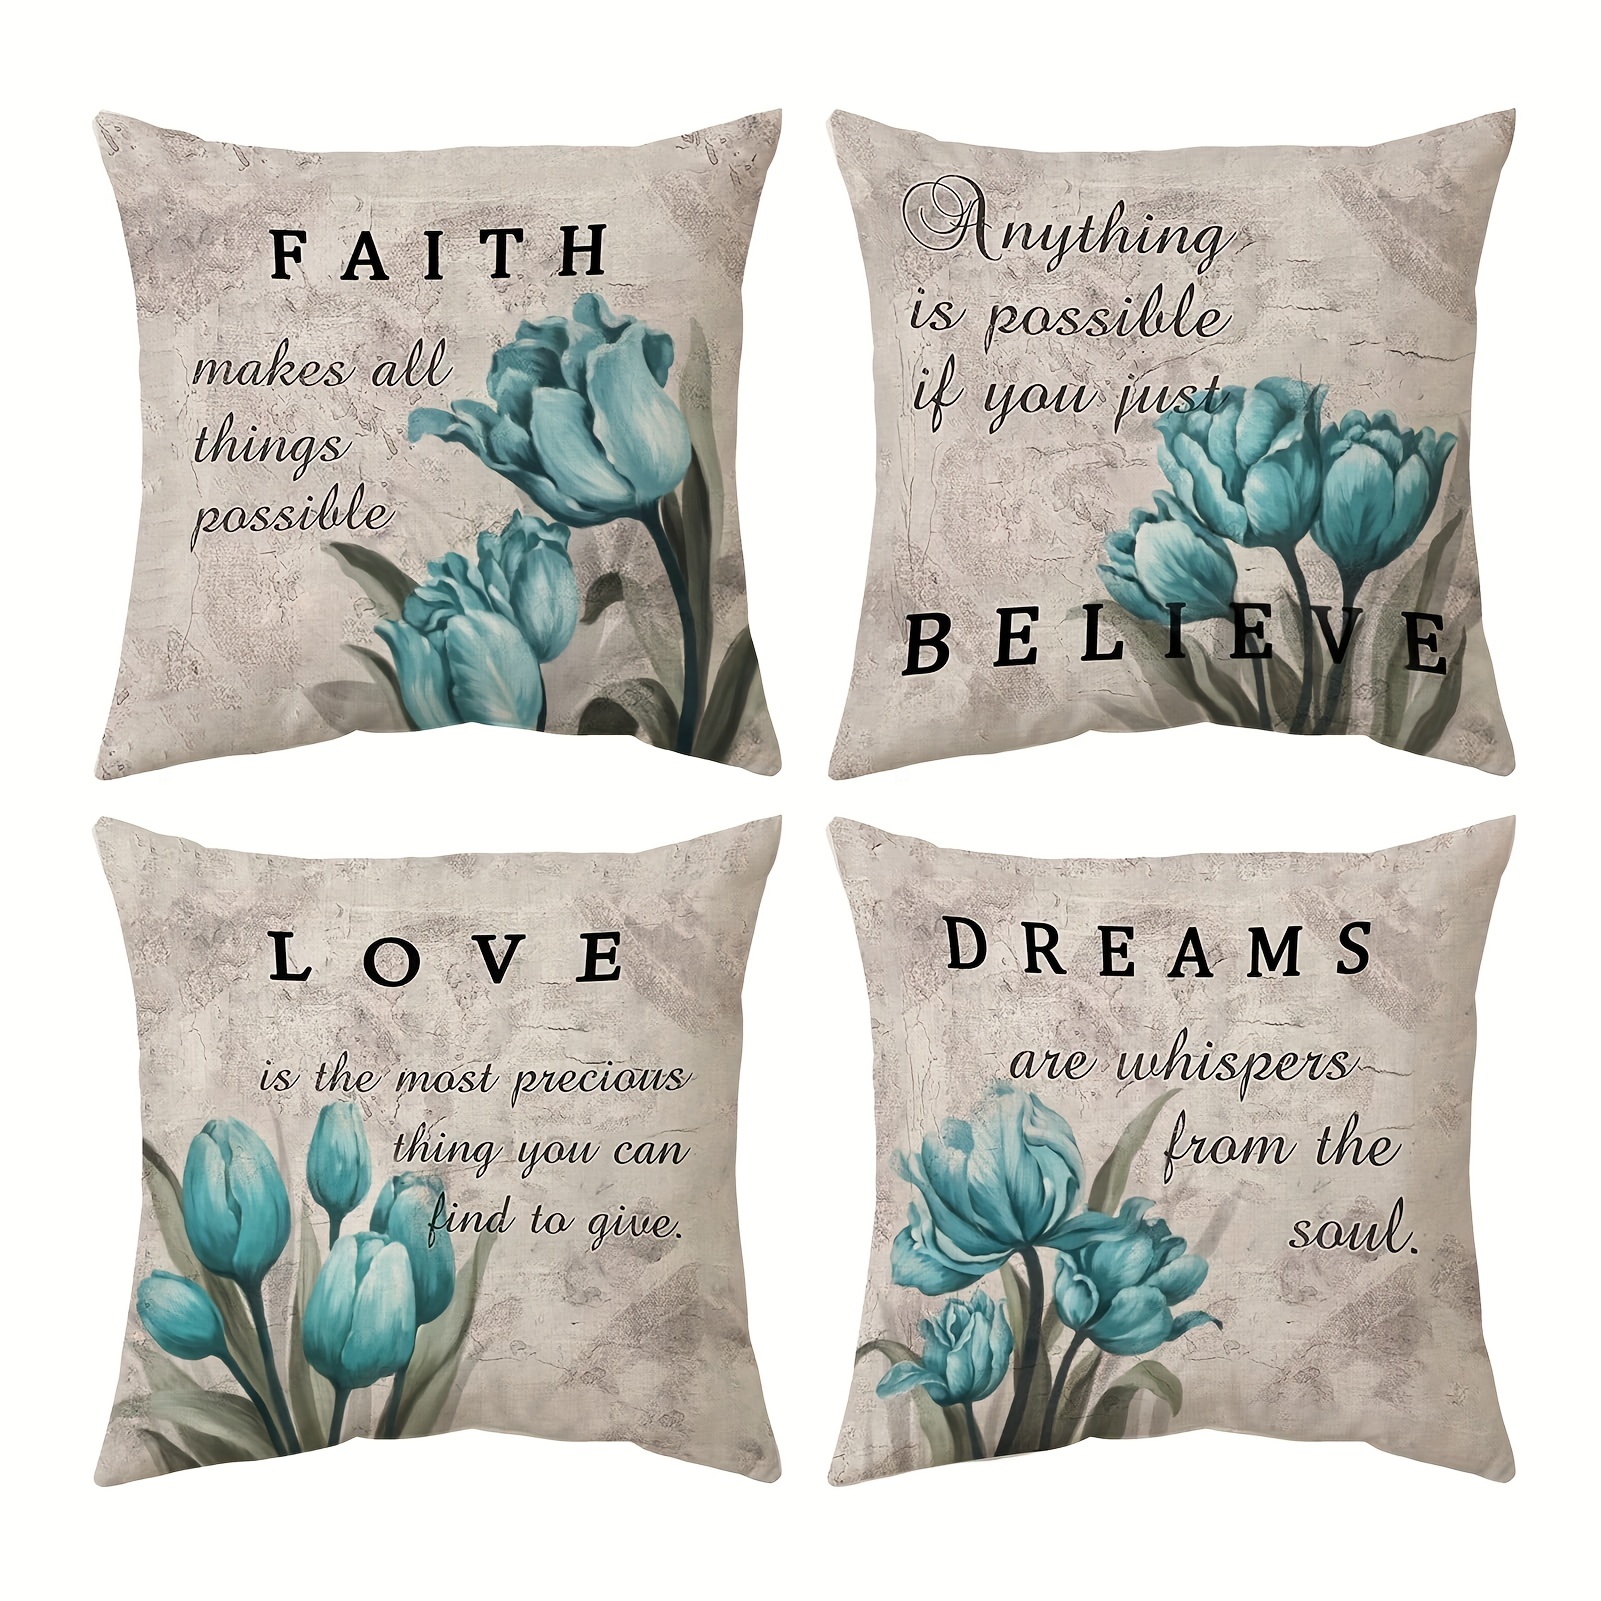 

4pcs Teal Tulip Decorative Pillows Covers Throw Pillows For Couch Sofa Living Room Bed Cushion Floral Patio Outdoor Pillow Covers For Farmhouse Modern Home Decor Short Plush Decor 18x18 Inch